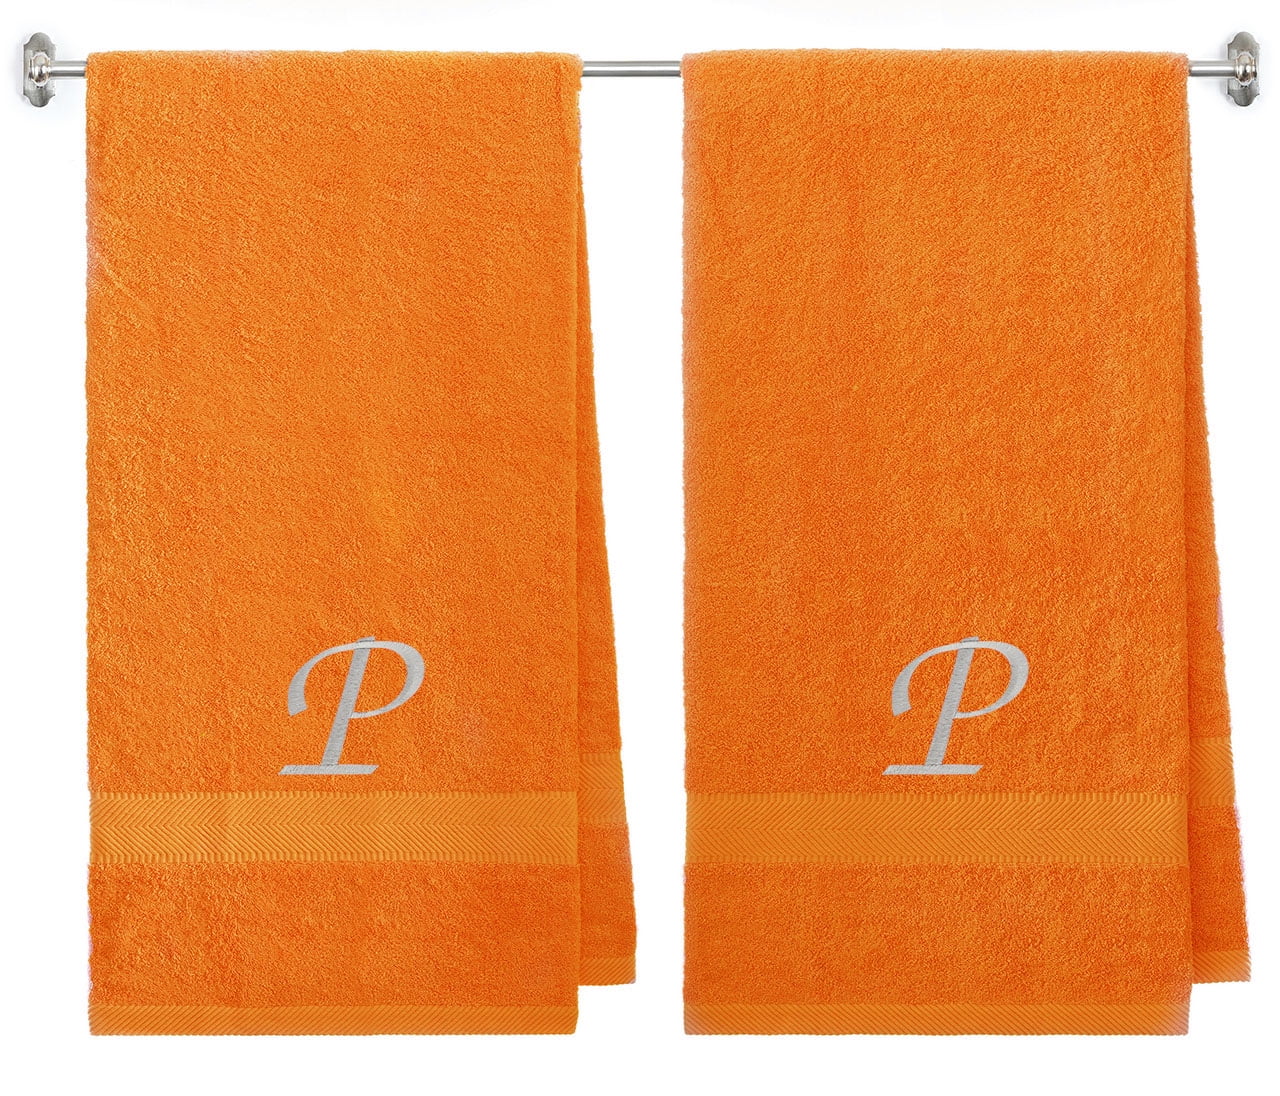 New EMBROIDERED PERSONALISED NAME BATH TOWEL Gift Set ANY INITIAL Combet Cotton 